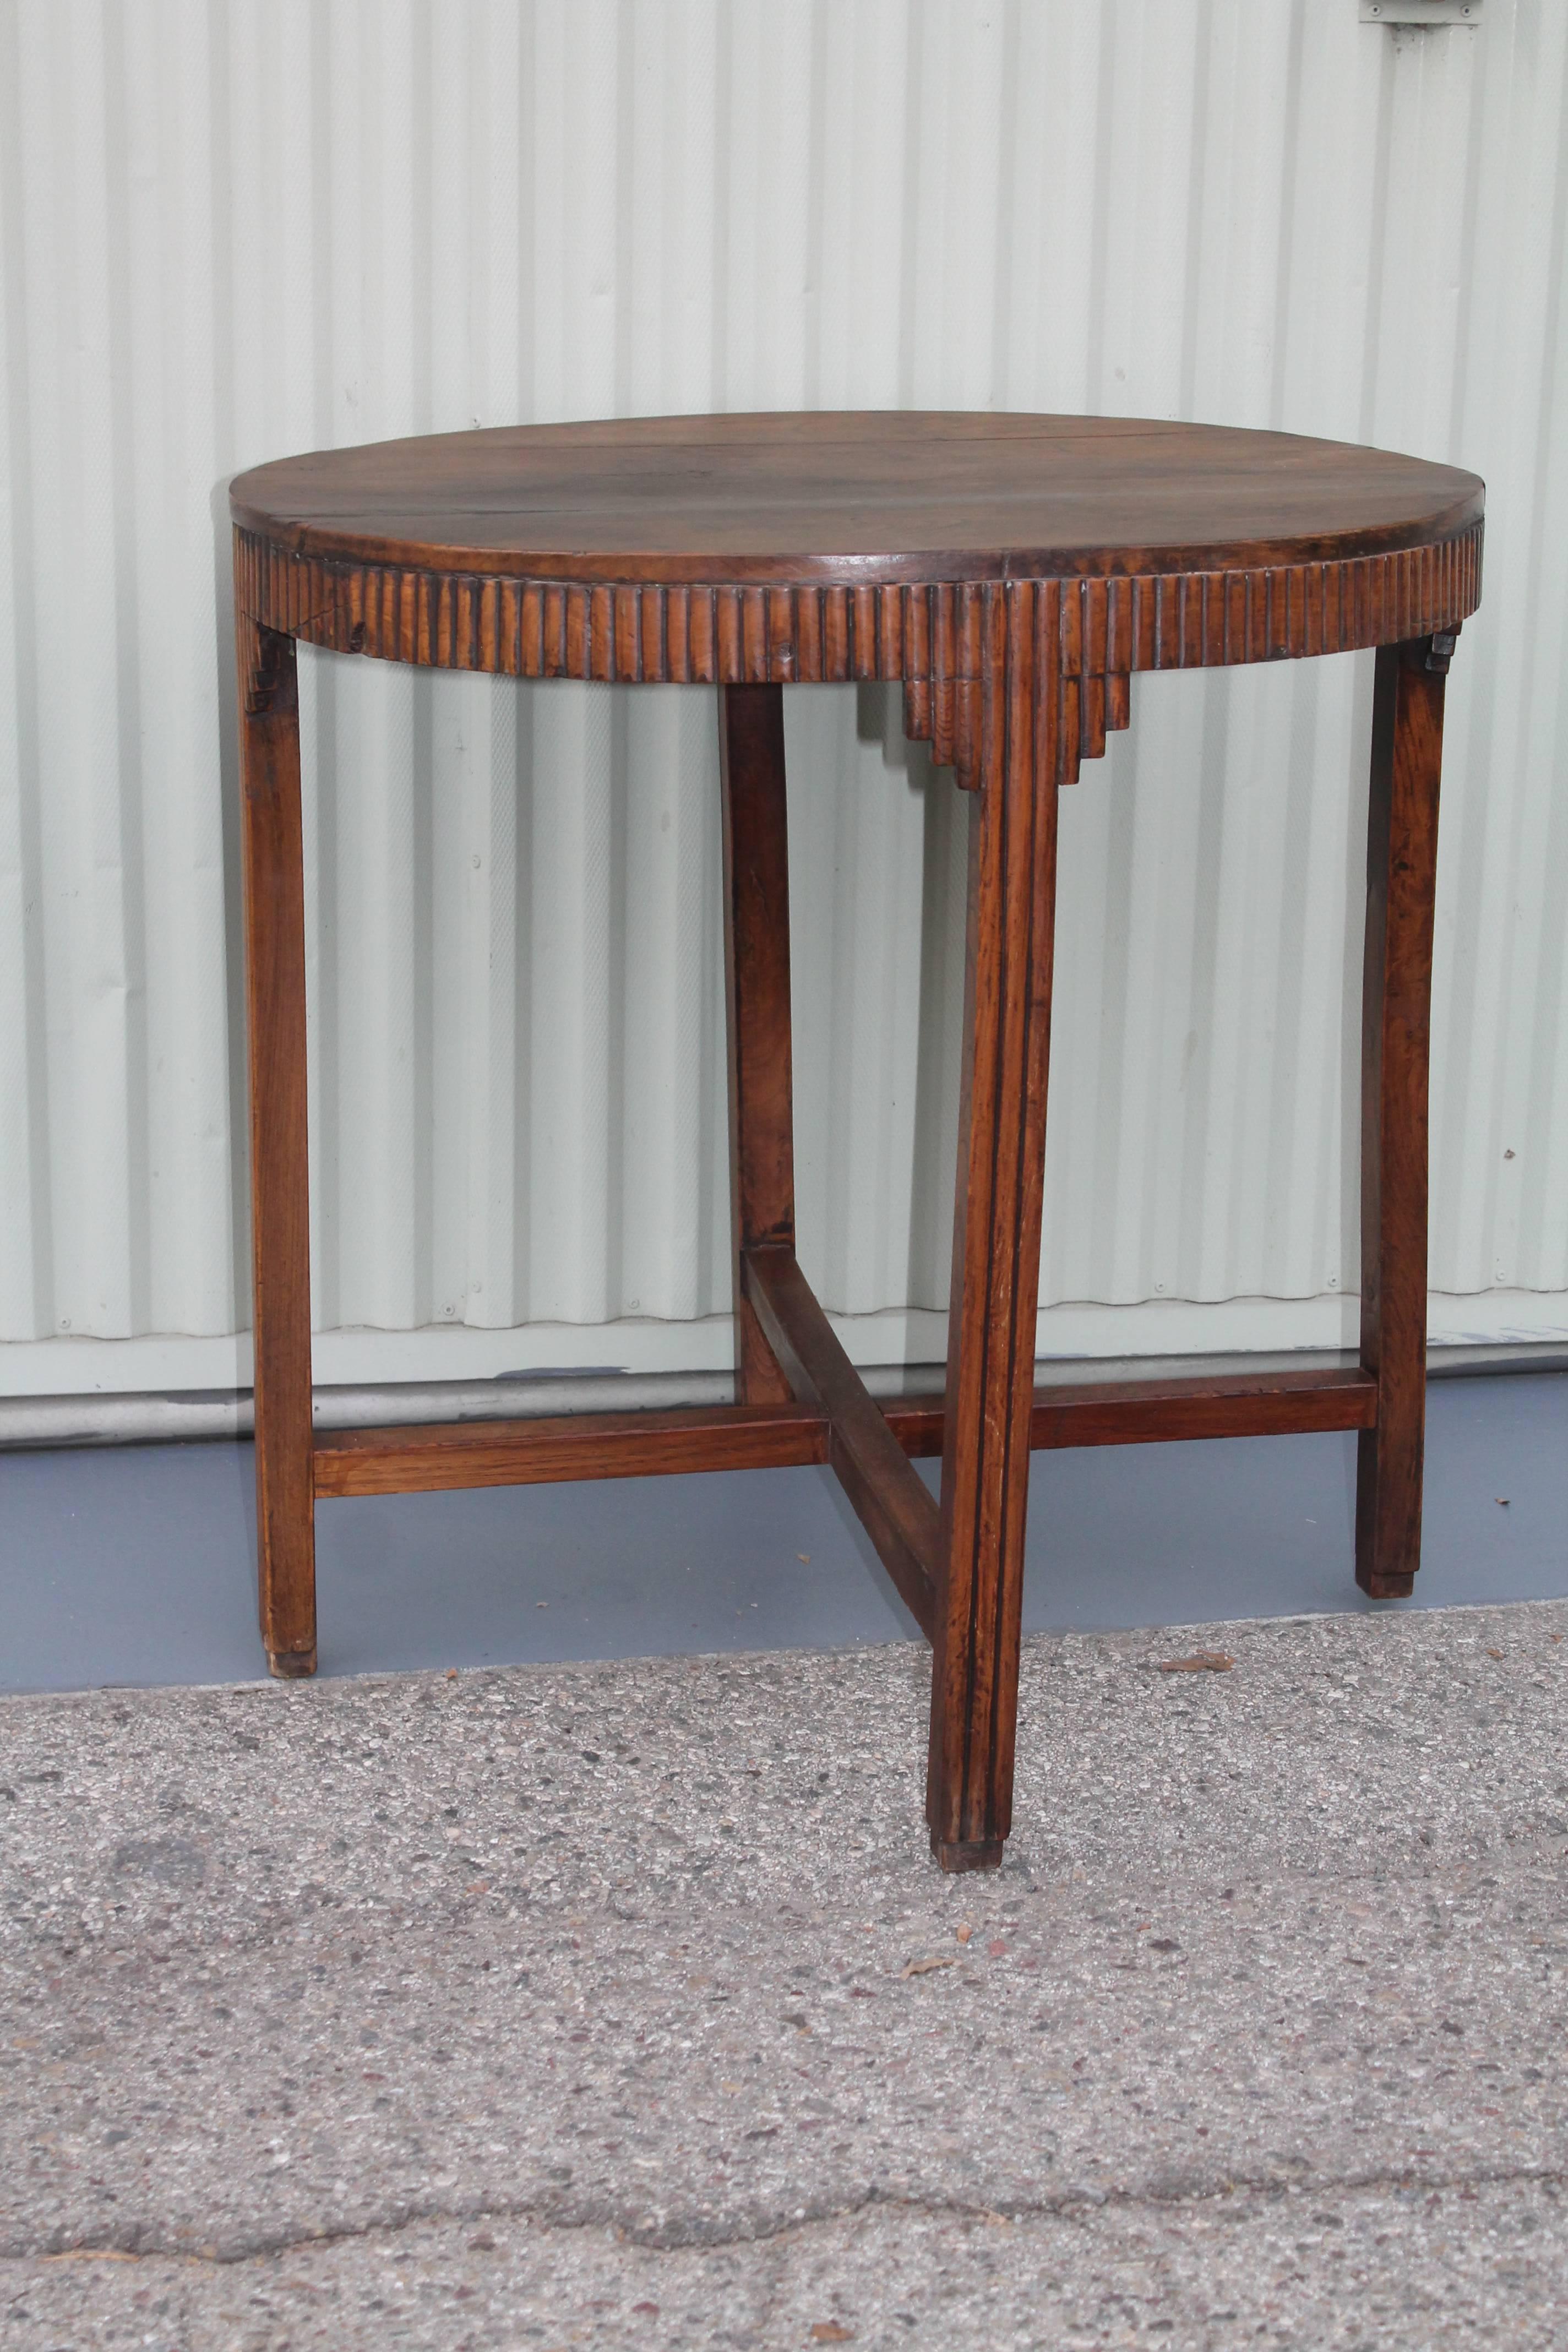 This fine handmade side table has a twig like inlaid trim. The condition is good with minor age cracks in areas. It is very sturdy and strong. Great looking side table.